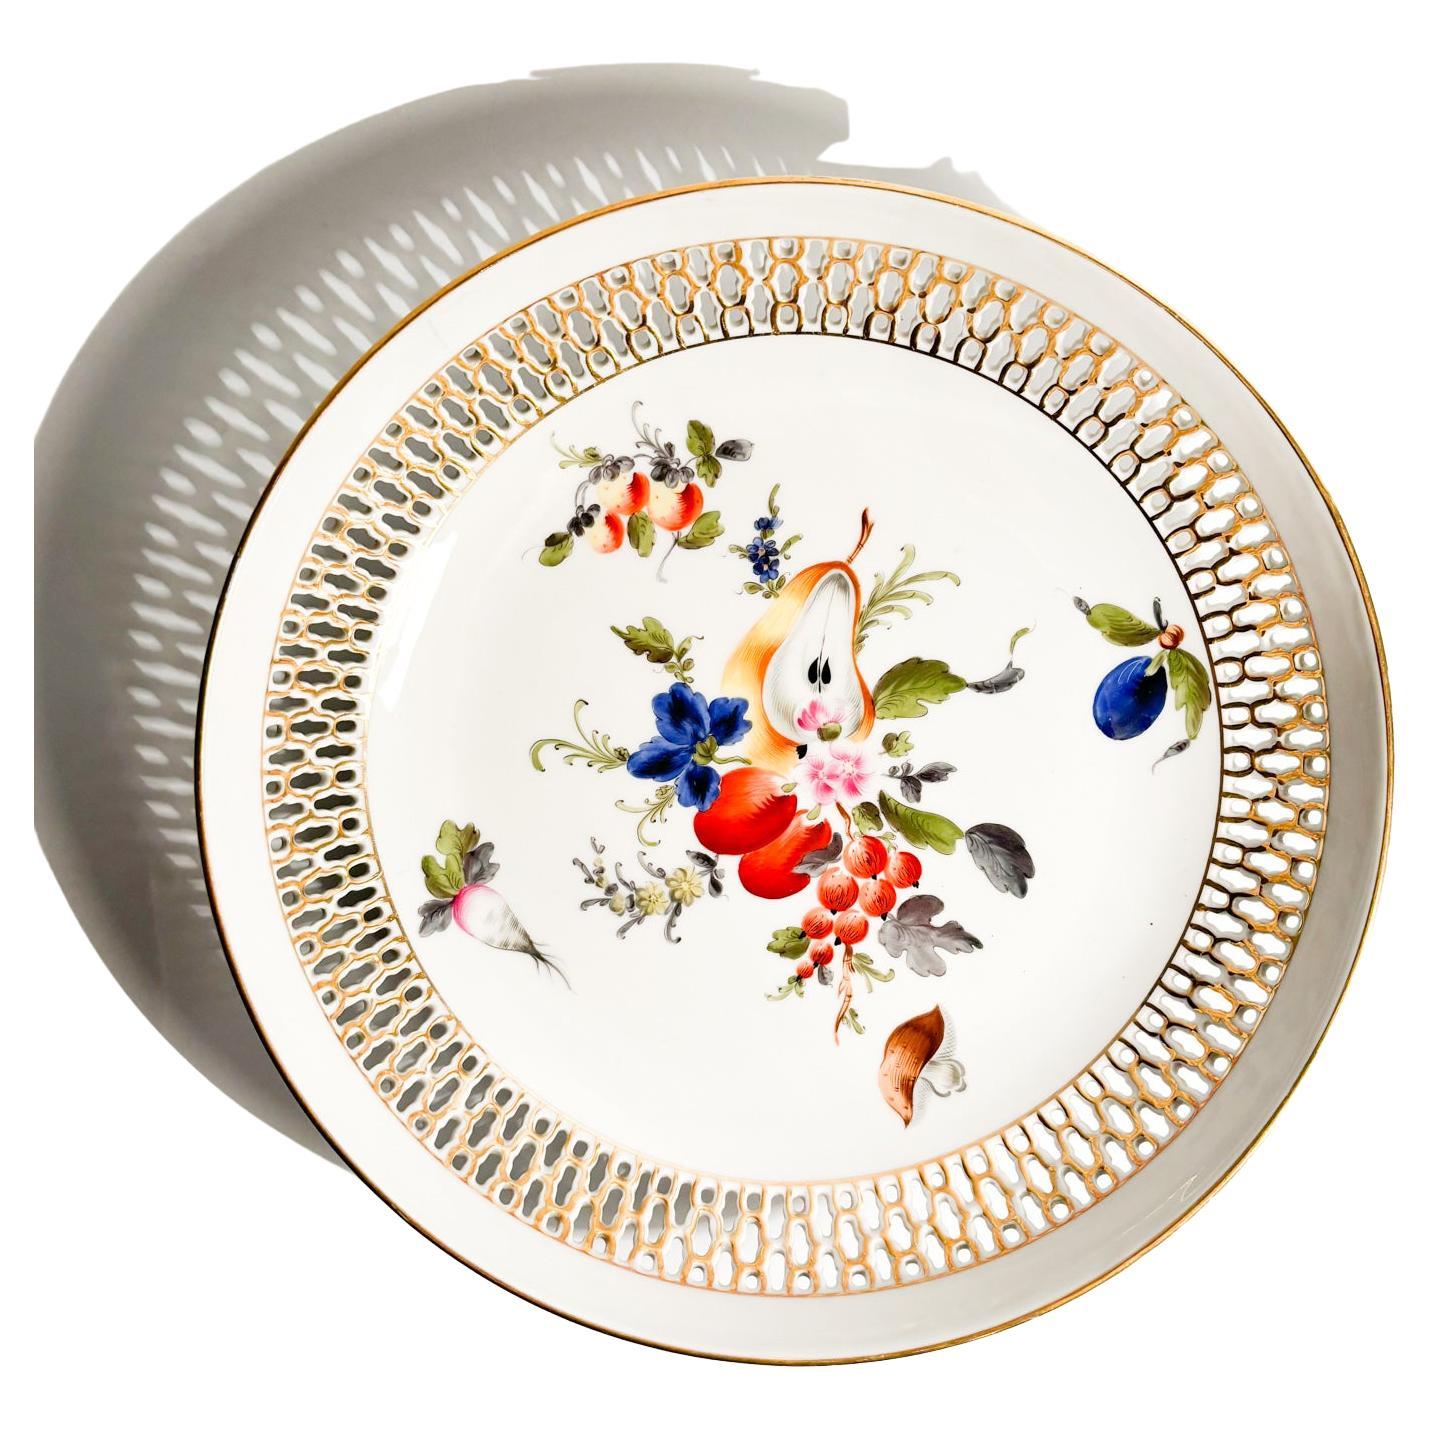 Hand-painted Herend porcelain bowl / centerpiece, with fruit motif, made in the 1960s

Ø 25 cm h 5 cm

Herend is a Hungarian manufacturing company specializing in luxury hand-painted and gilded porcelain . Founded in 1826, it is based in the town of